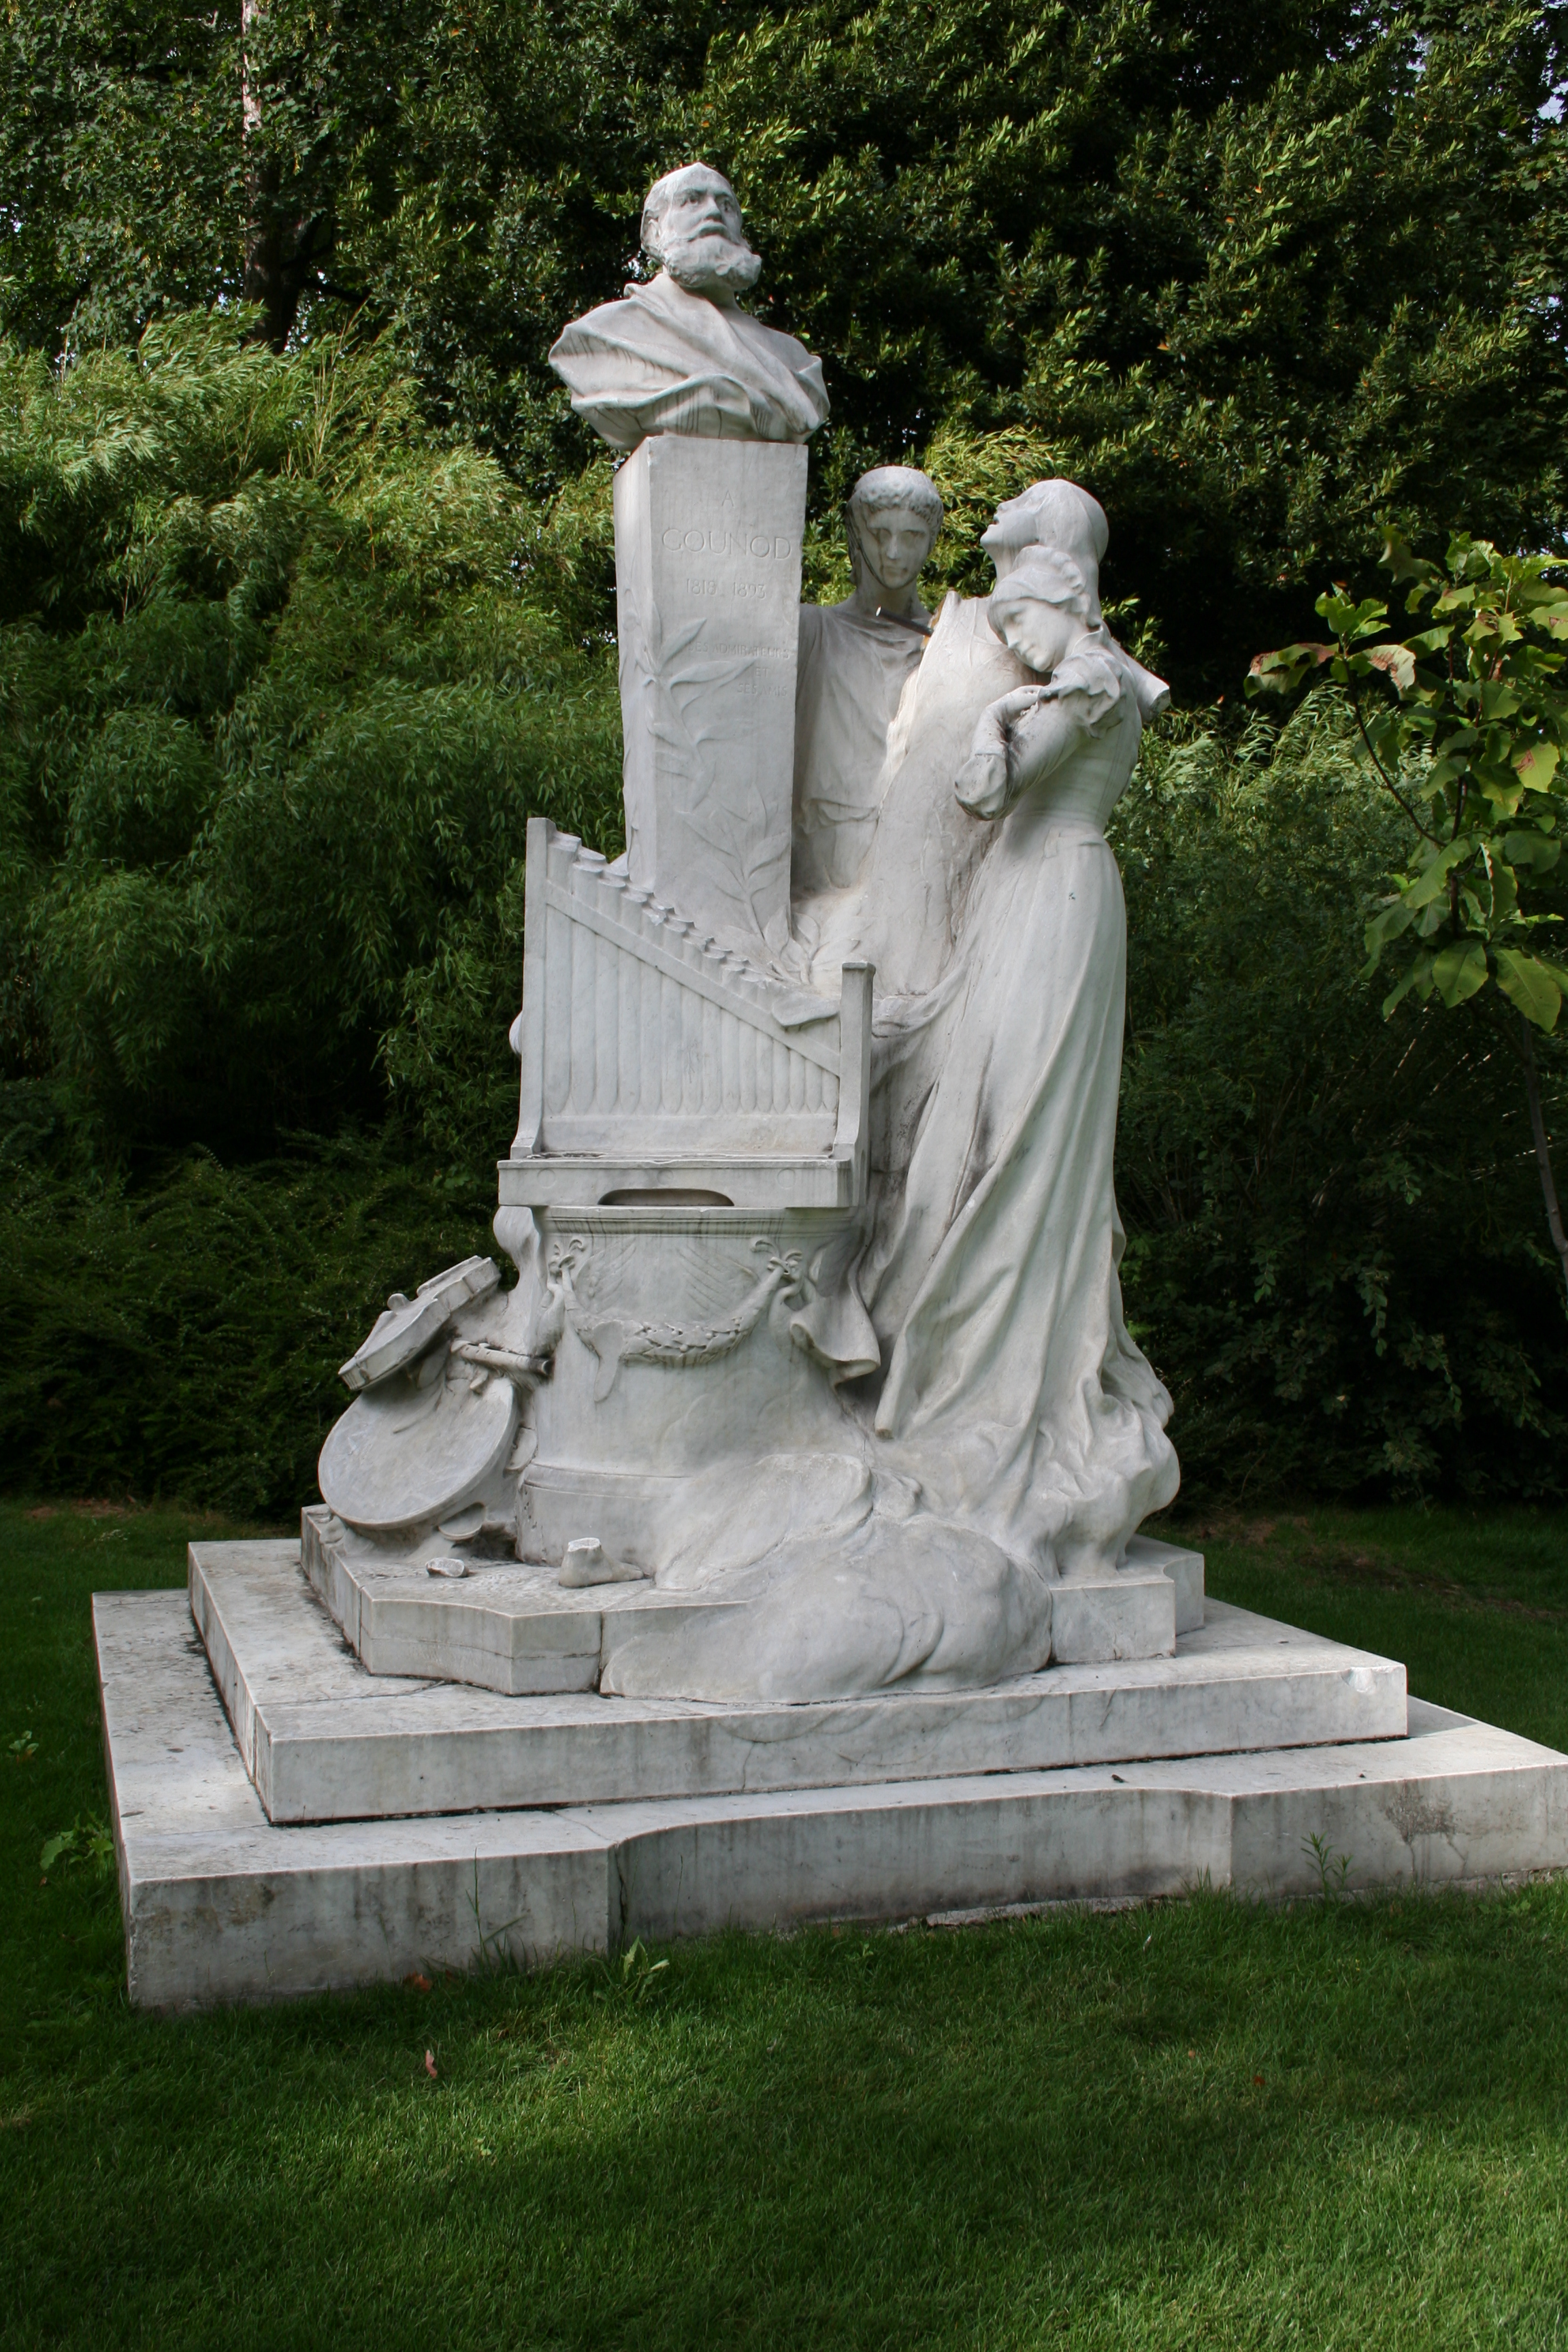 http://upload.wikimedia.org/wikipedia/commons/9/98/Parc_Monceau_20060812_Charles_Gounod.jpg